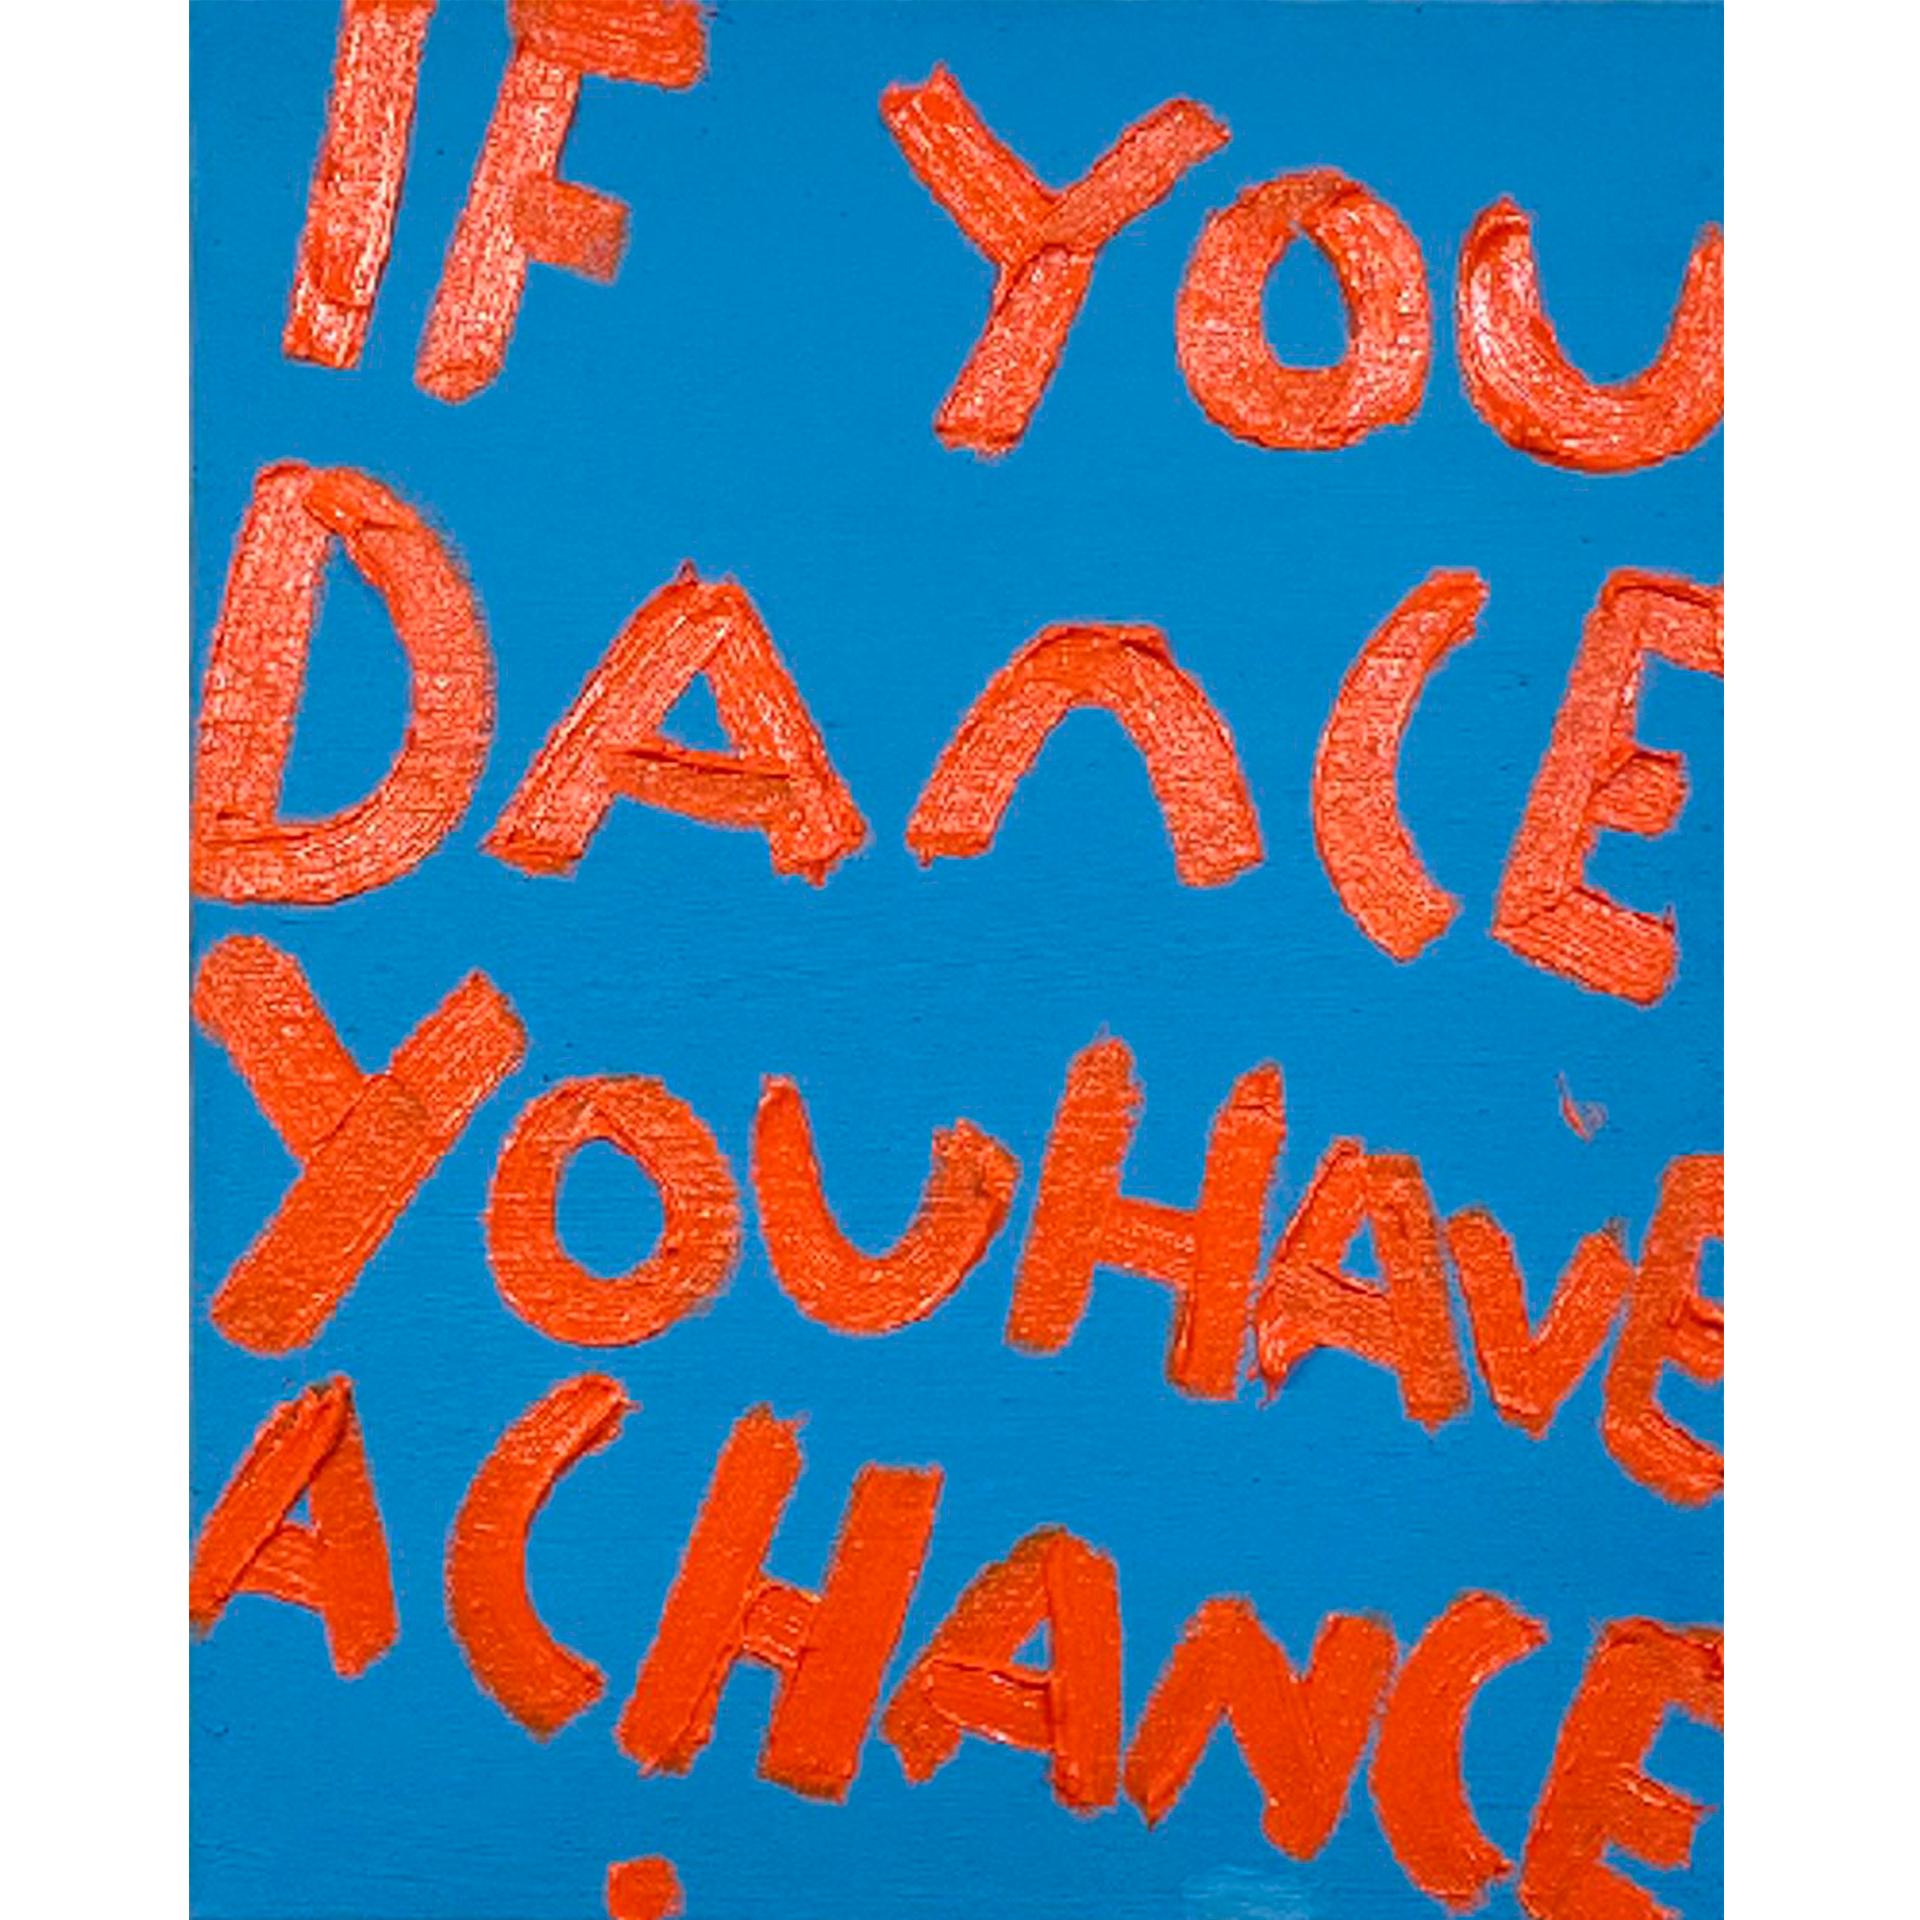 Eric Stefanski

Dance and chance, 2022

Oil and acrylic on canvas

Eric Stefanski lives and works in Chicago. He studied at the School of the Art Institute of Chicago
and received his MFA at the School of the Museum of Fine Arts Boston. His work is